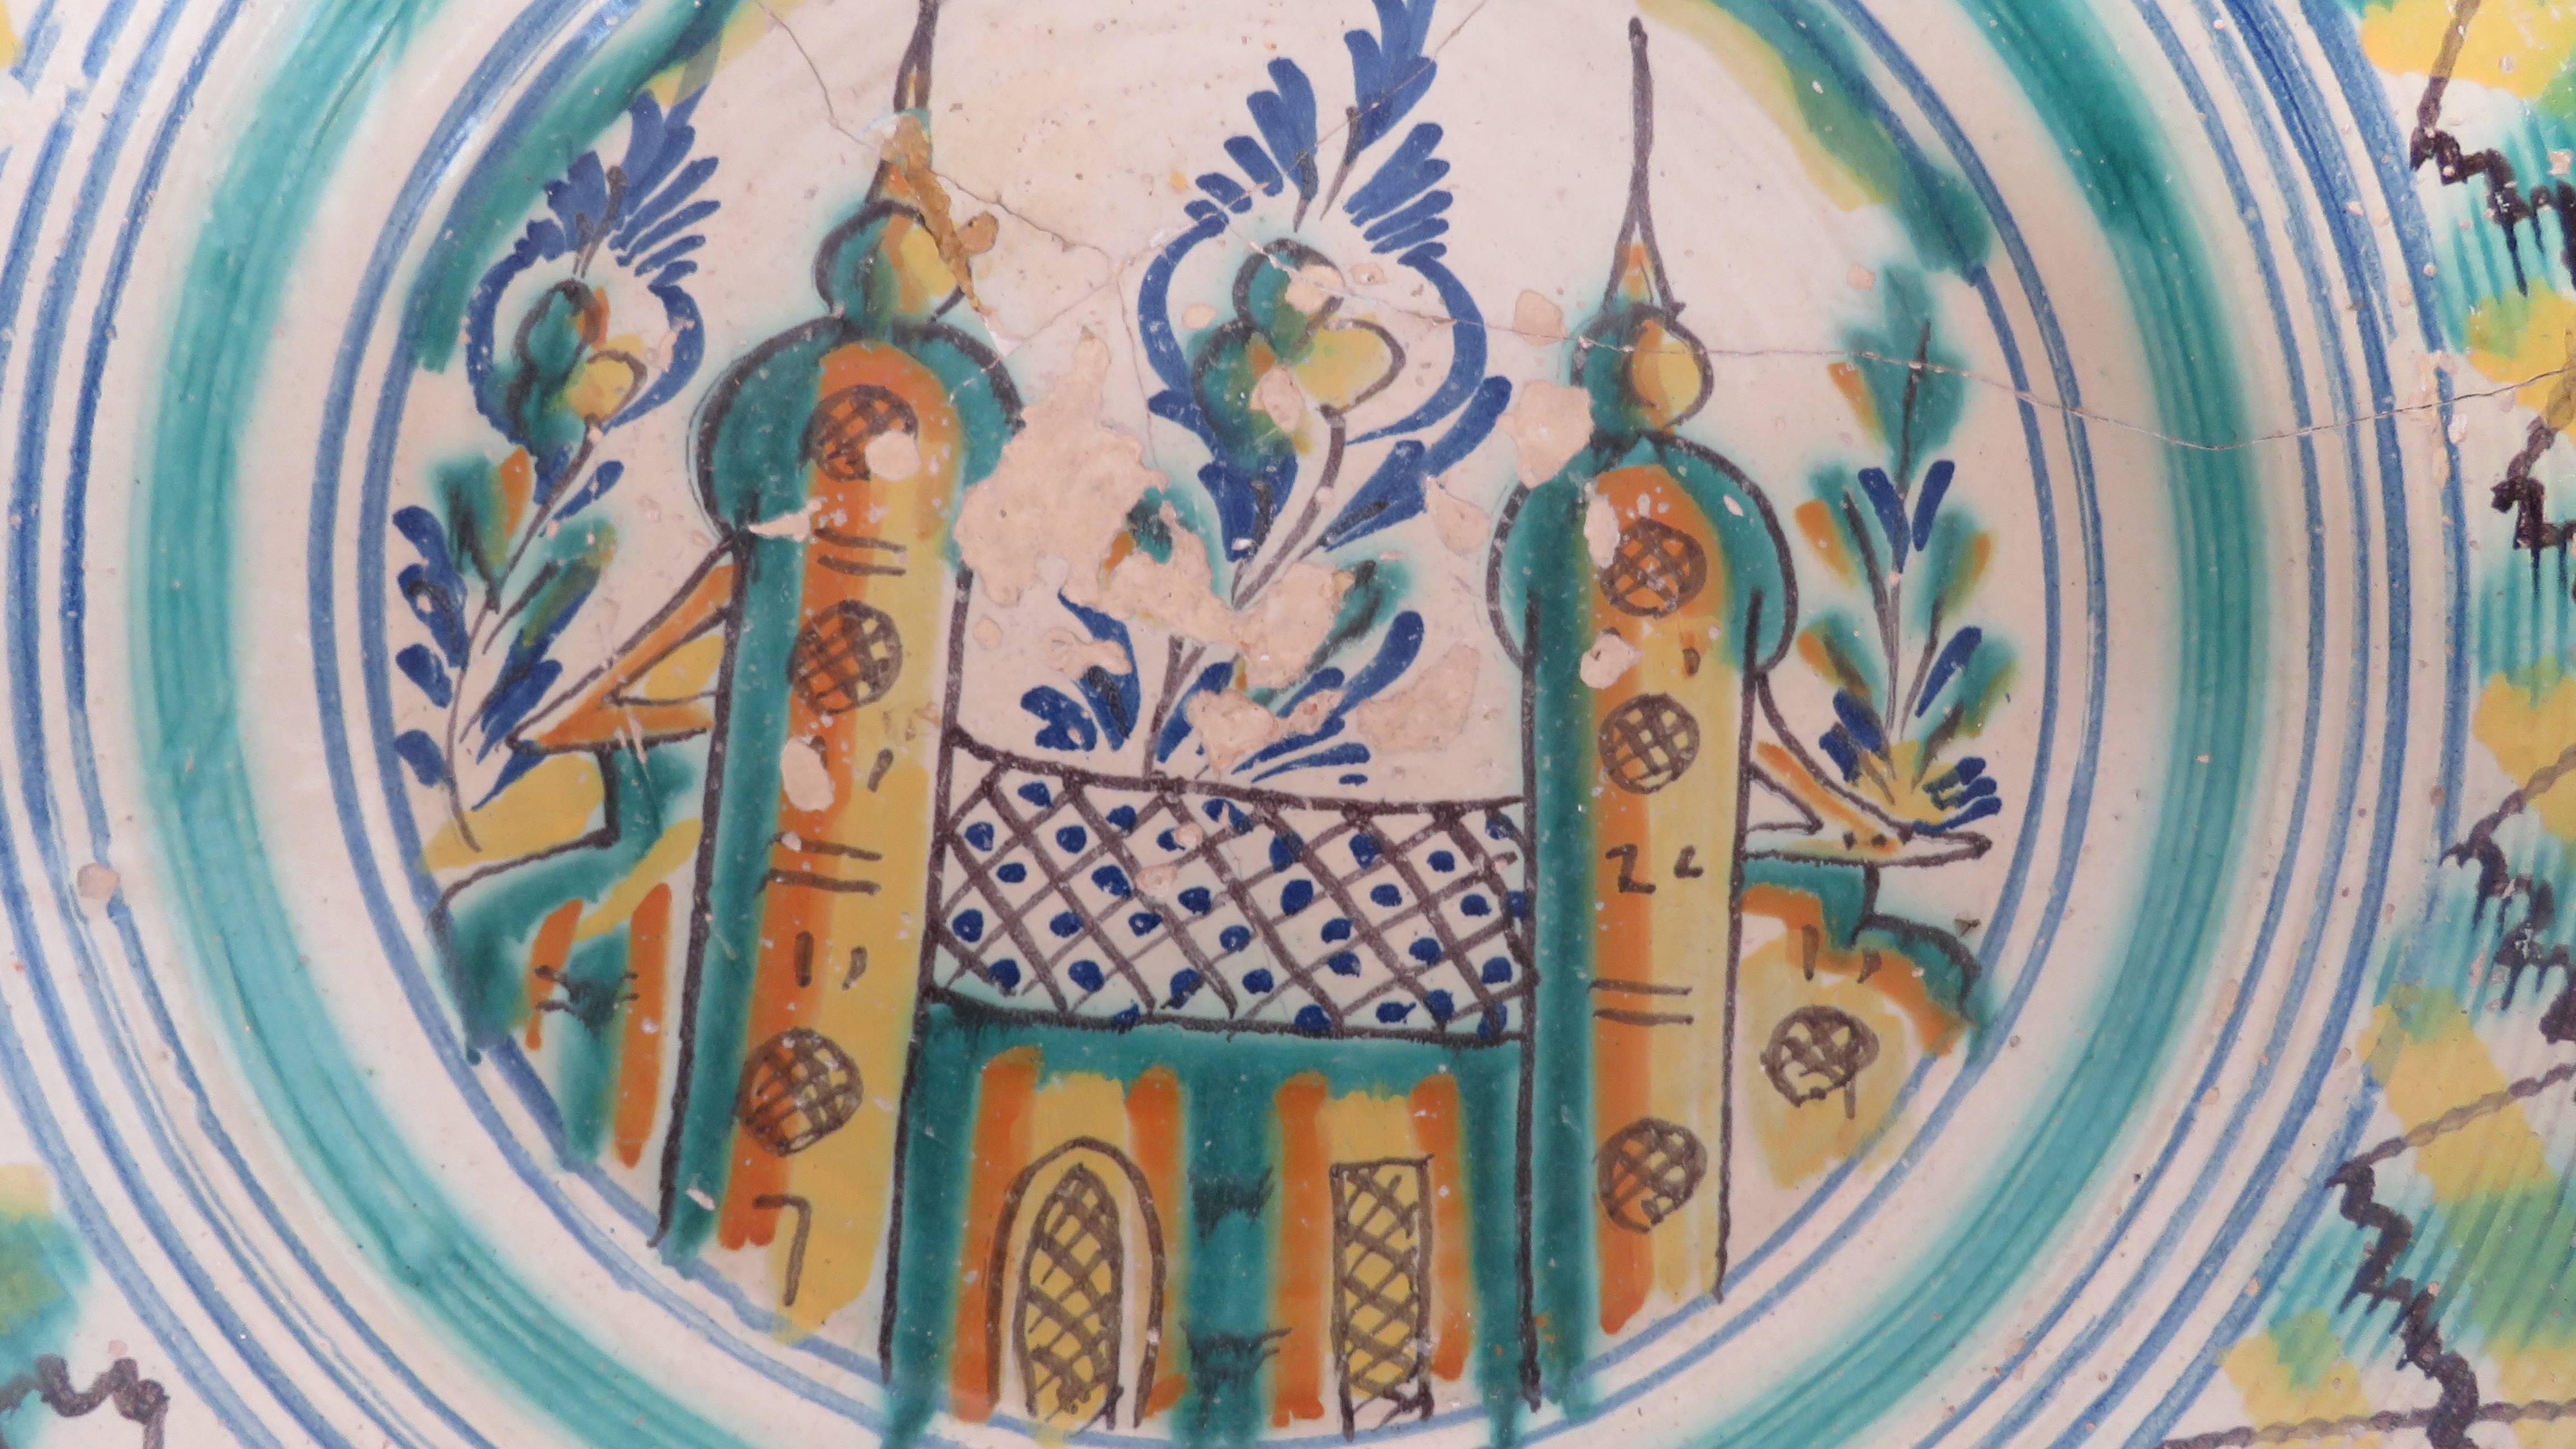 Glazes of copper green, cobalt blue, yellow and manganese on a bone white slip with a castle within a landscape setting of flowers. Origin: Sevilla, Spain

Back metal hooks included.